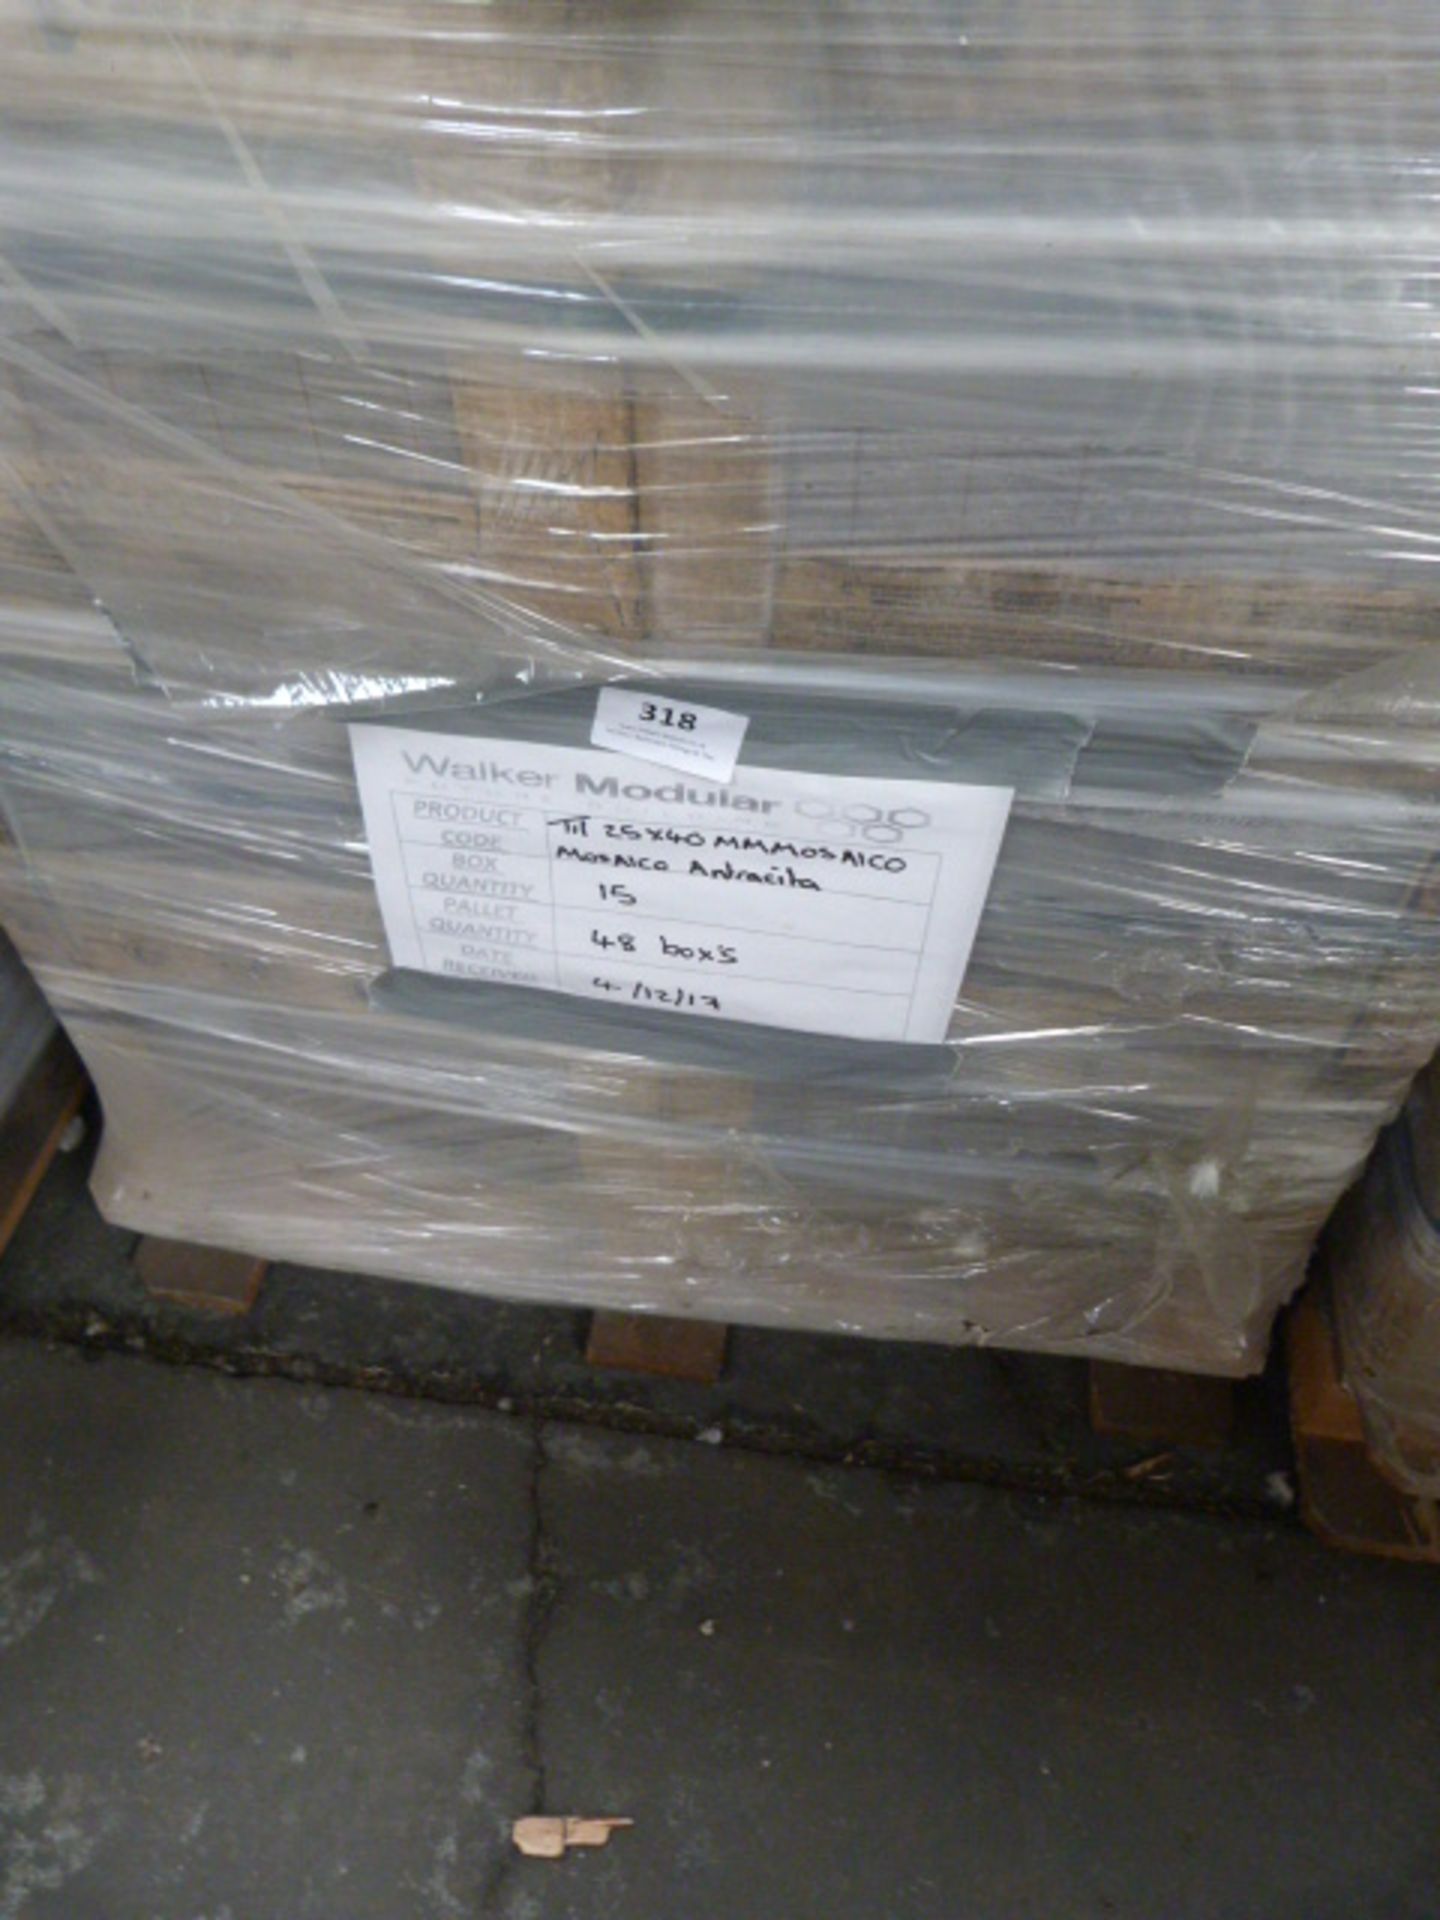 *Pallet Containing 48 Boxes of Til 25 by 40 MM Mos